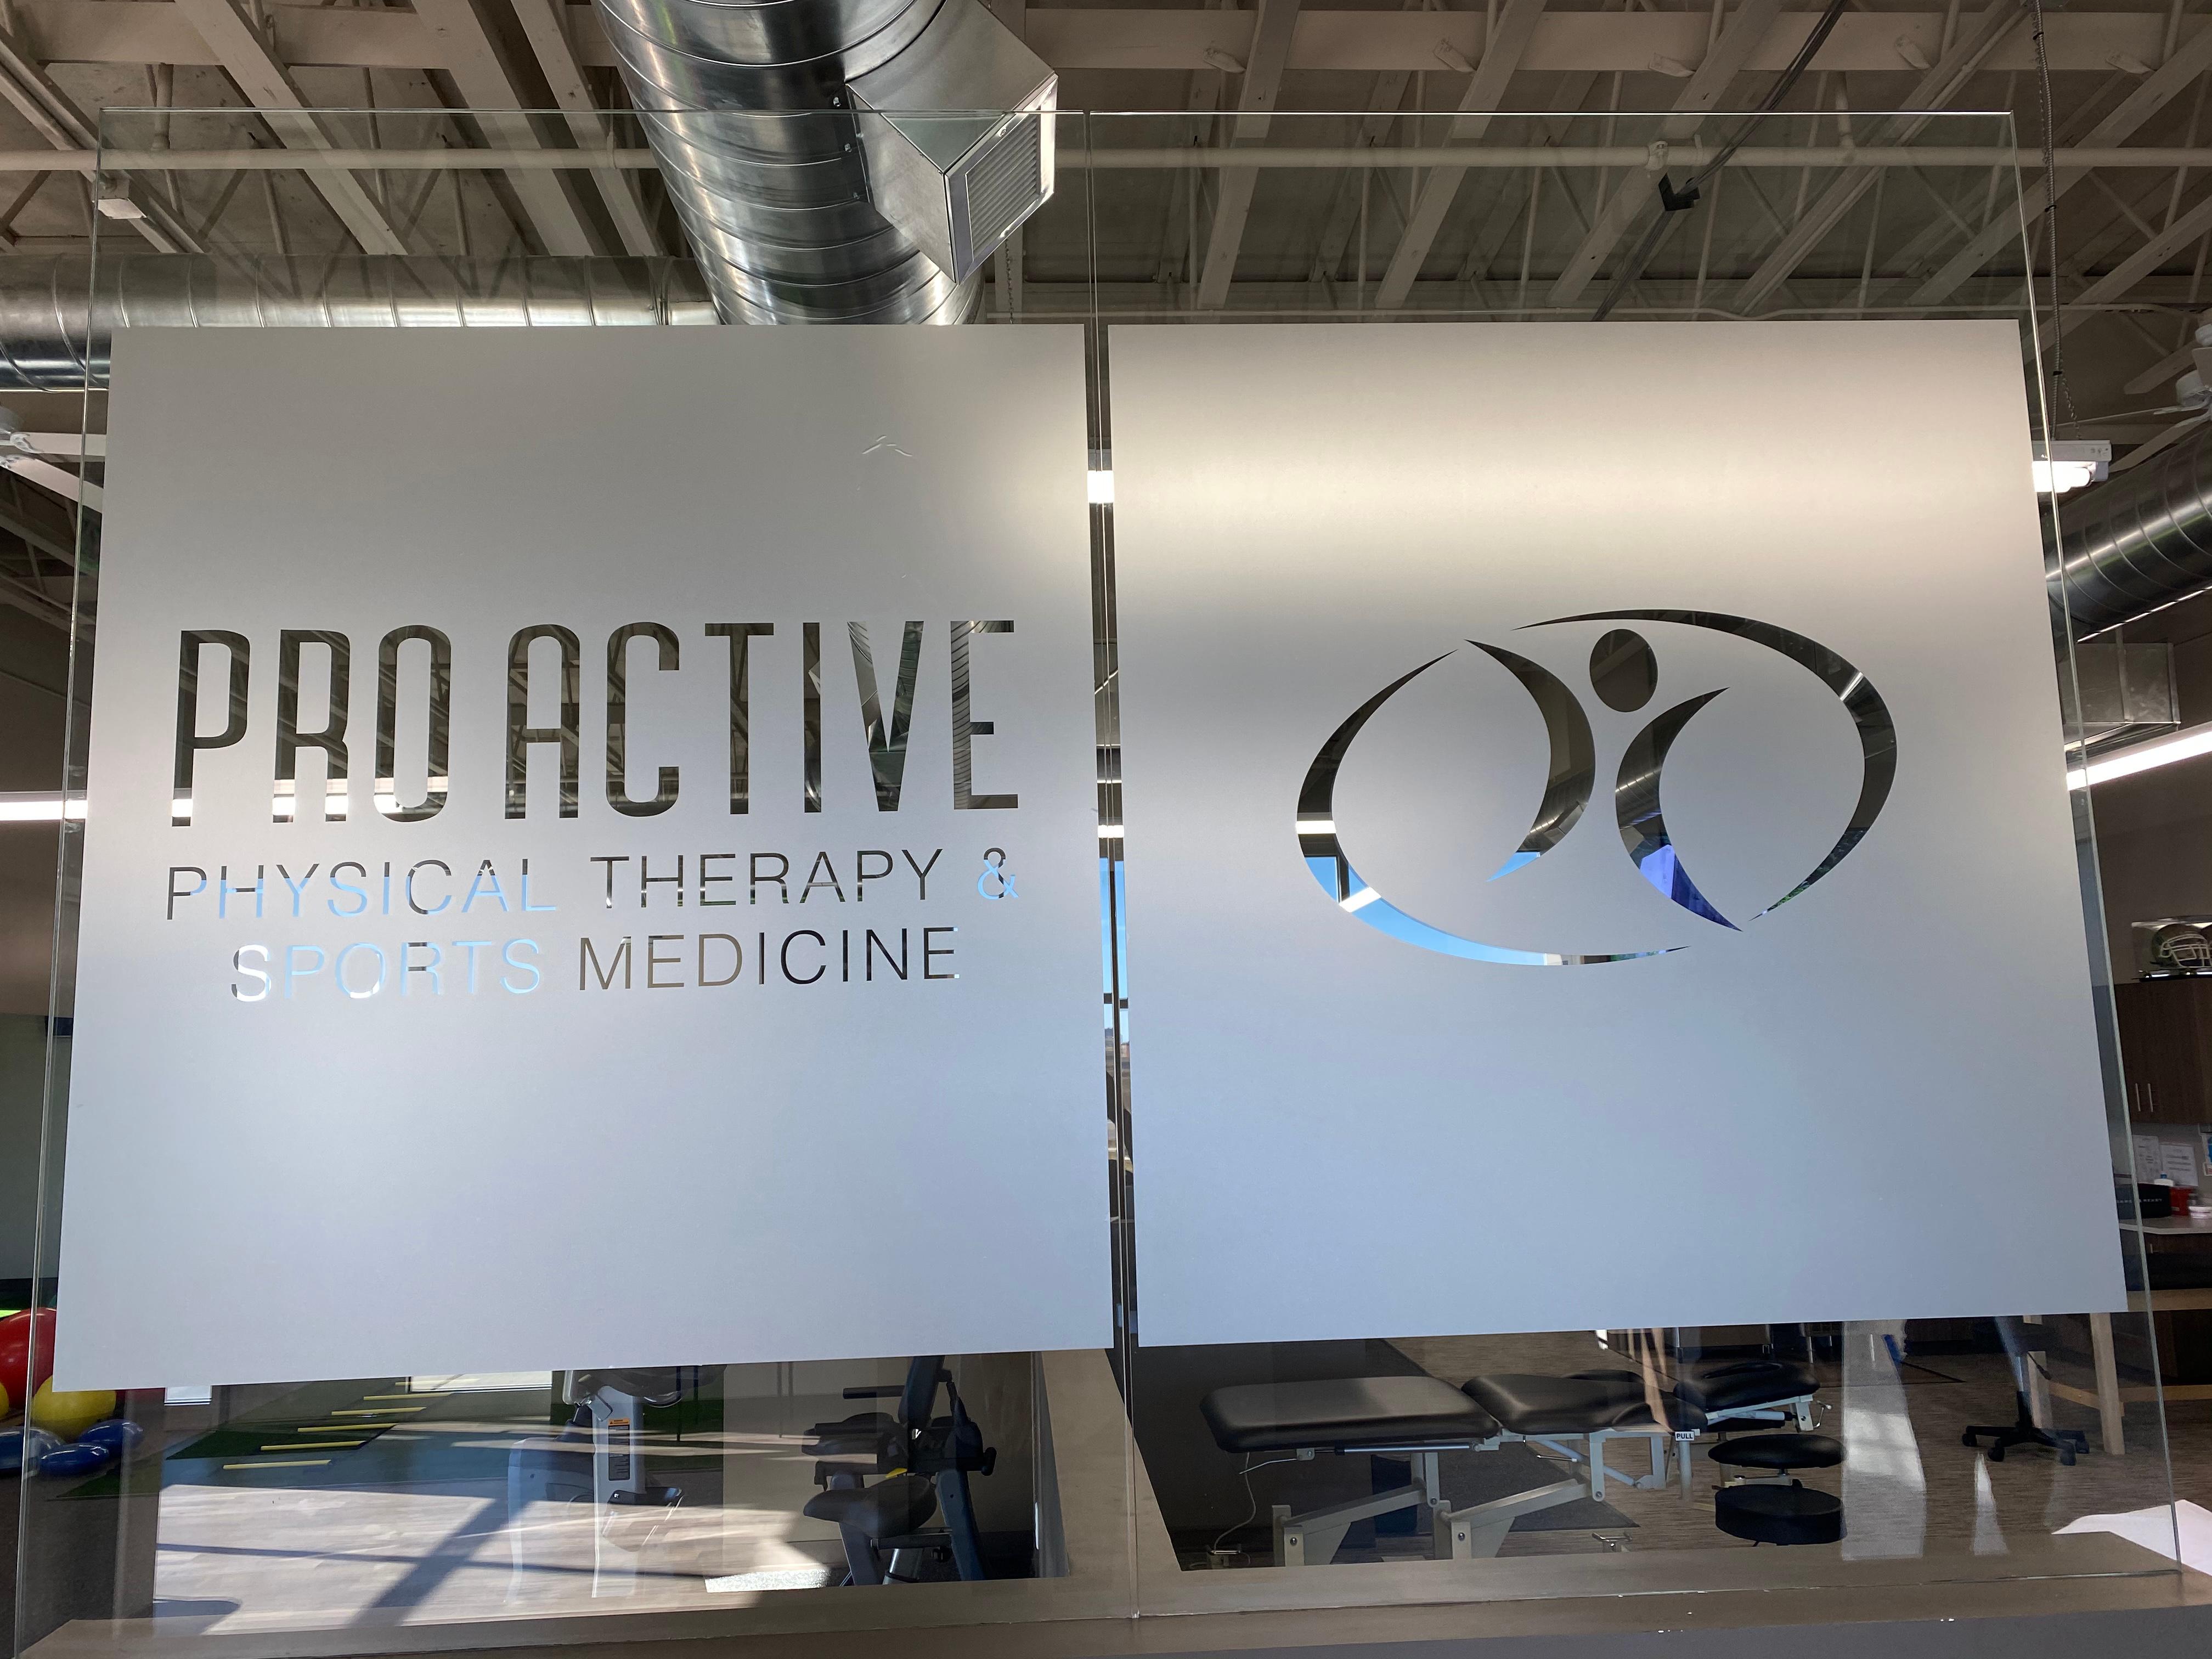 Pro Active Physical Therapy & Sports Medicine
1321 South 4th Ave
Brighton